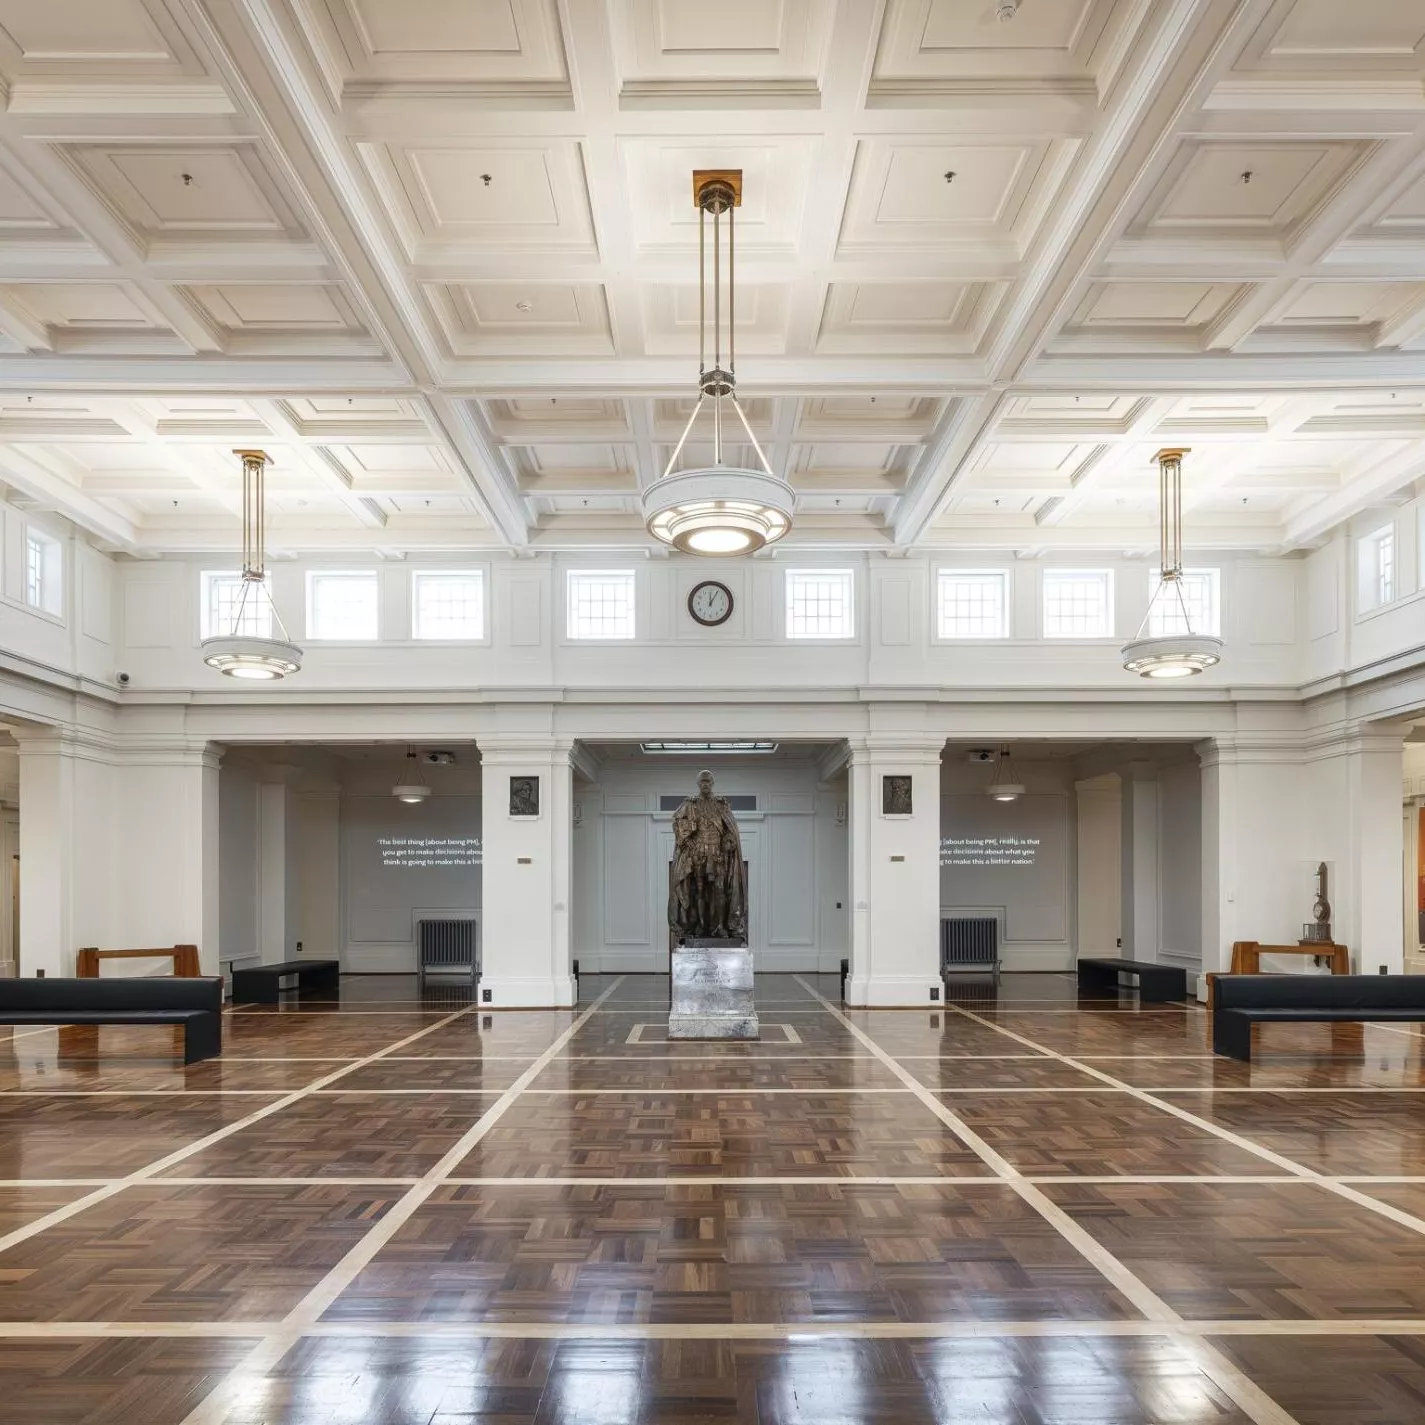 Architecture of Old Parliament House